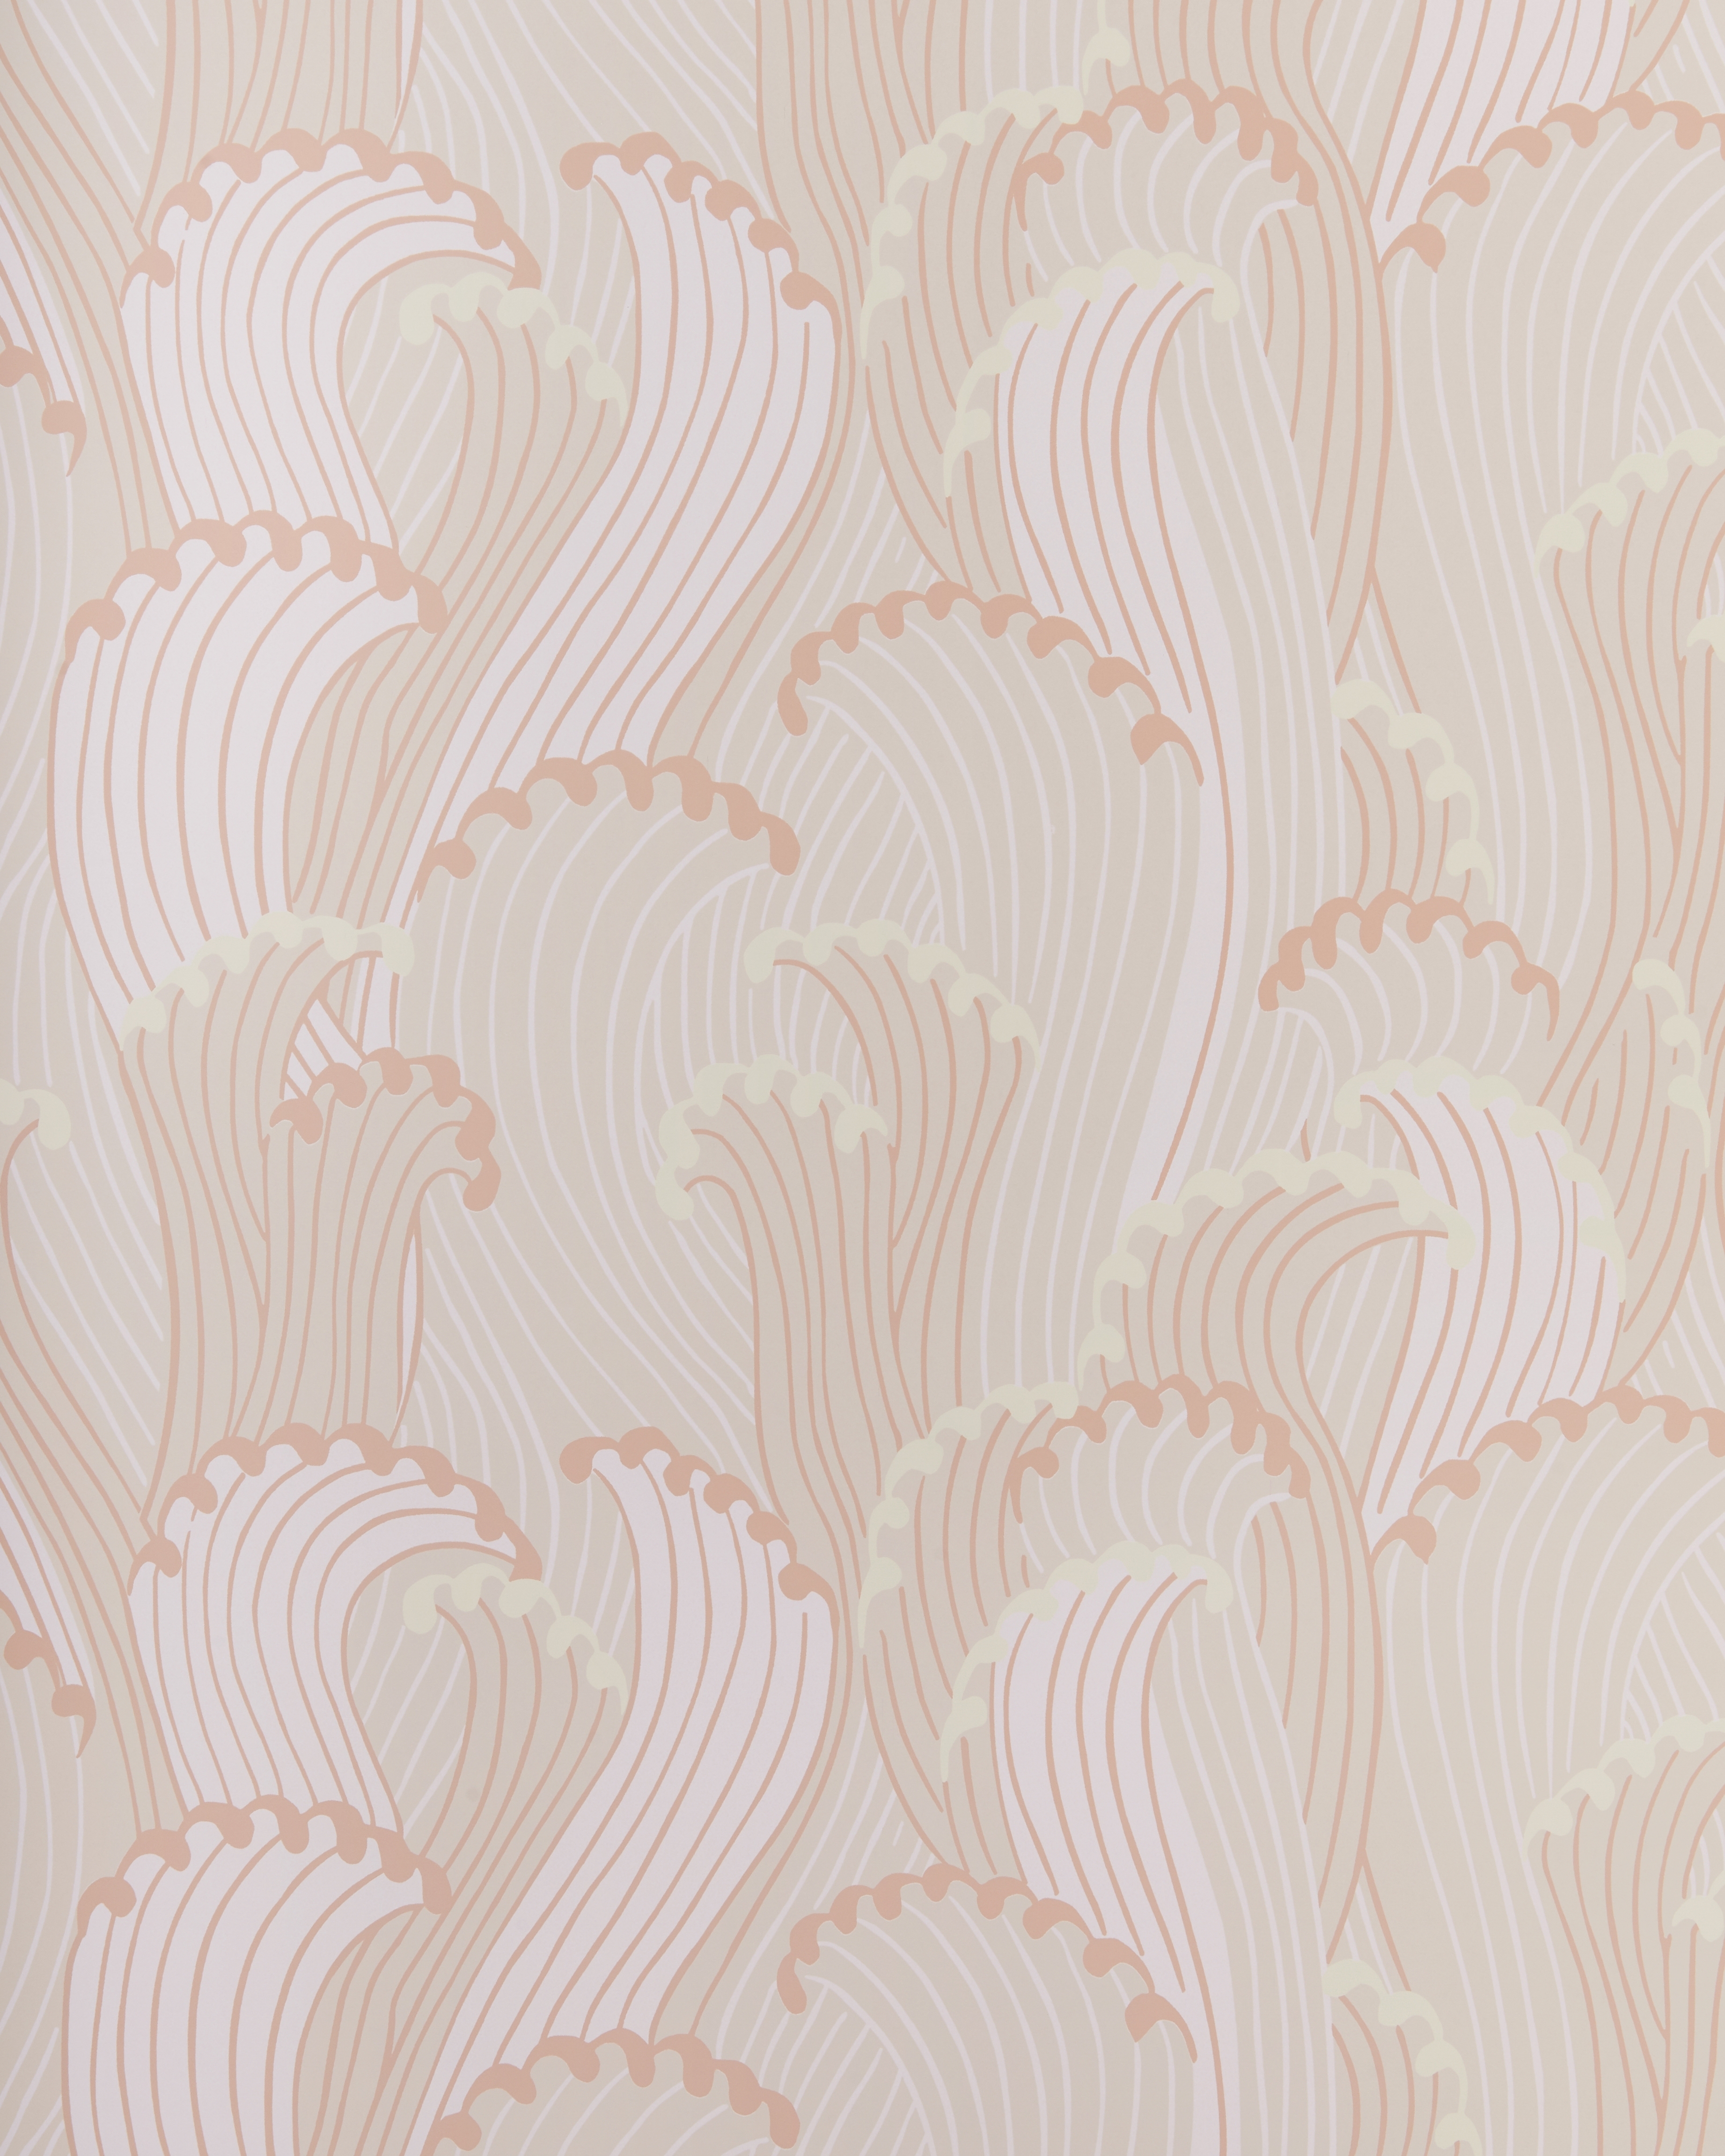 Pastel Waves Wallpaper by Taylor Sterling - Image 3